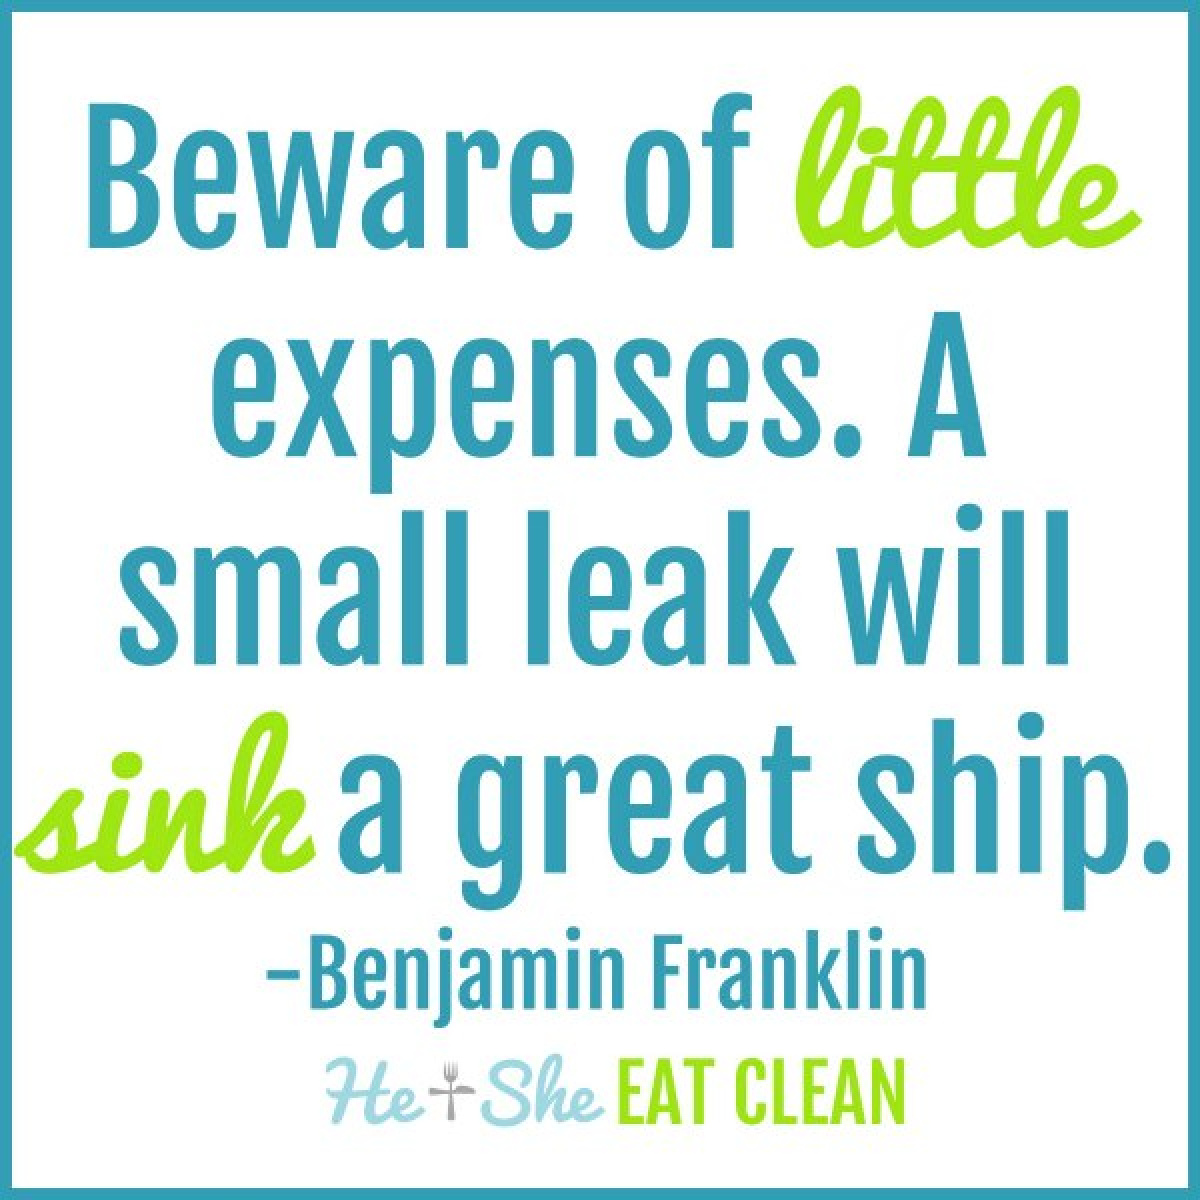 text reads Beware of little expenses. A small leak will sink a great ship. - Benjamin Franklin